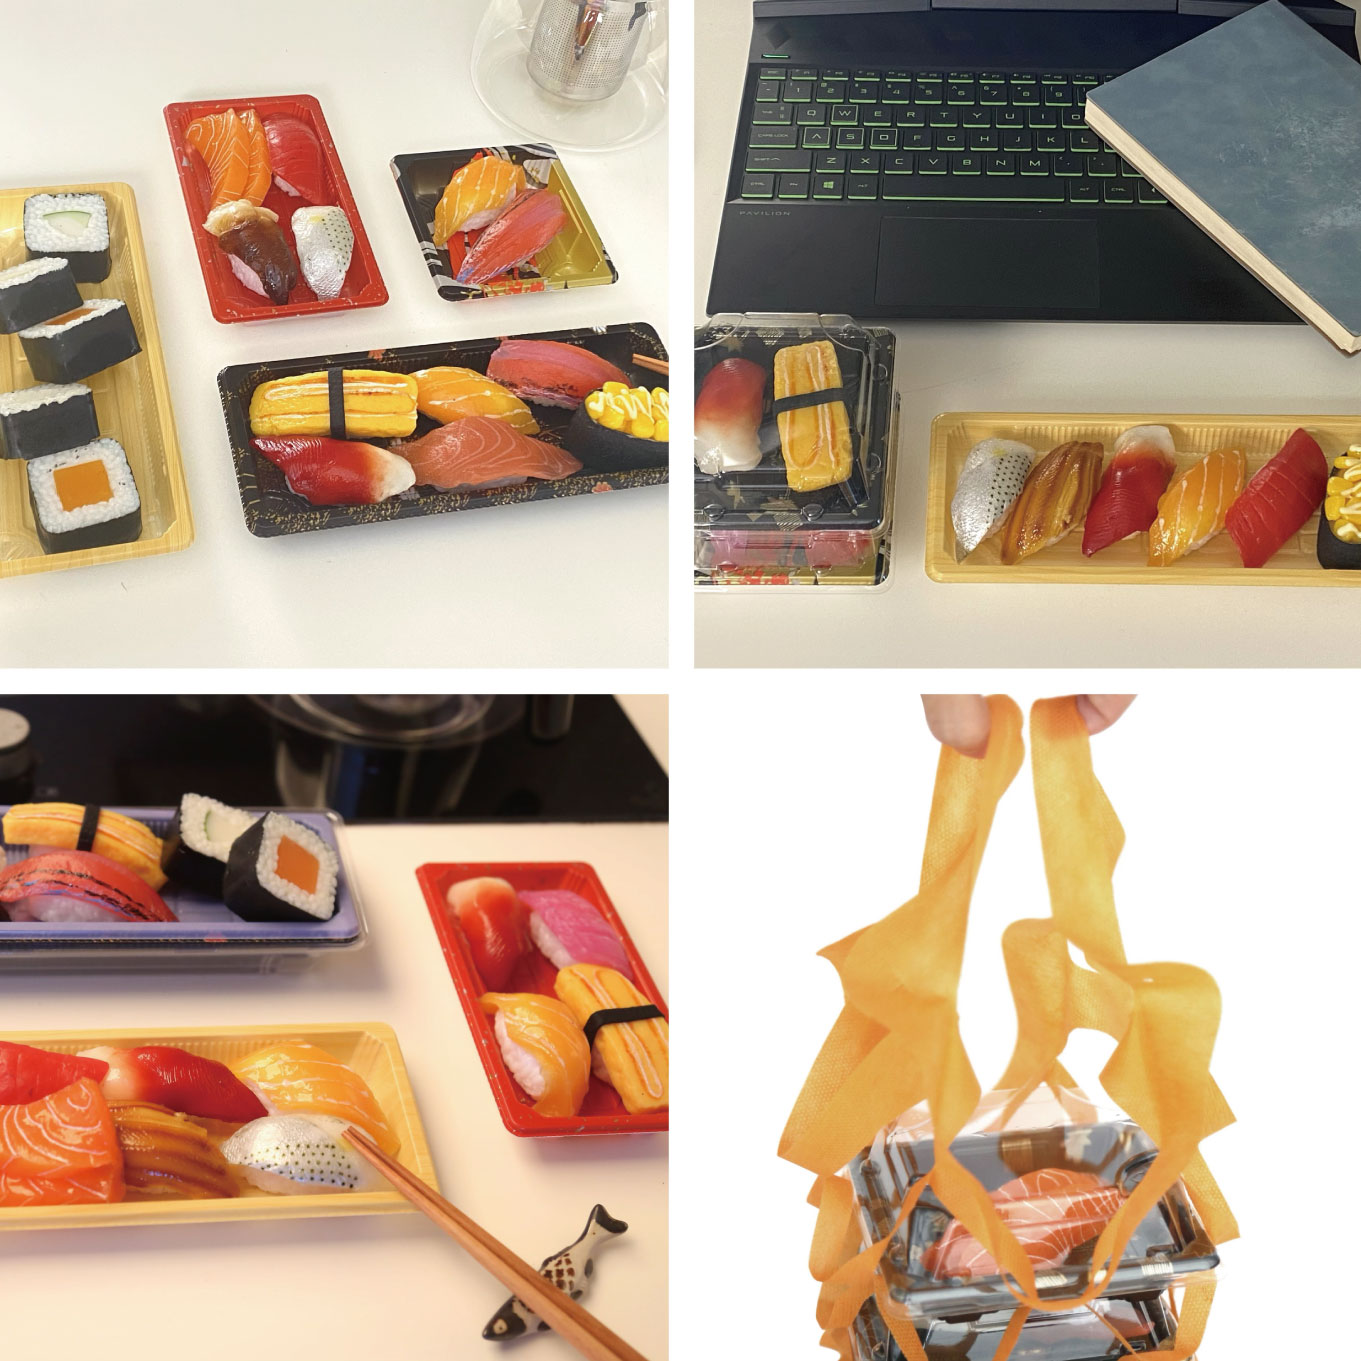 Sushi plate WL-01 in the kitchen, office, dinner scene application and it is ready to take away.